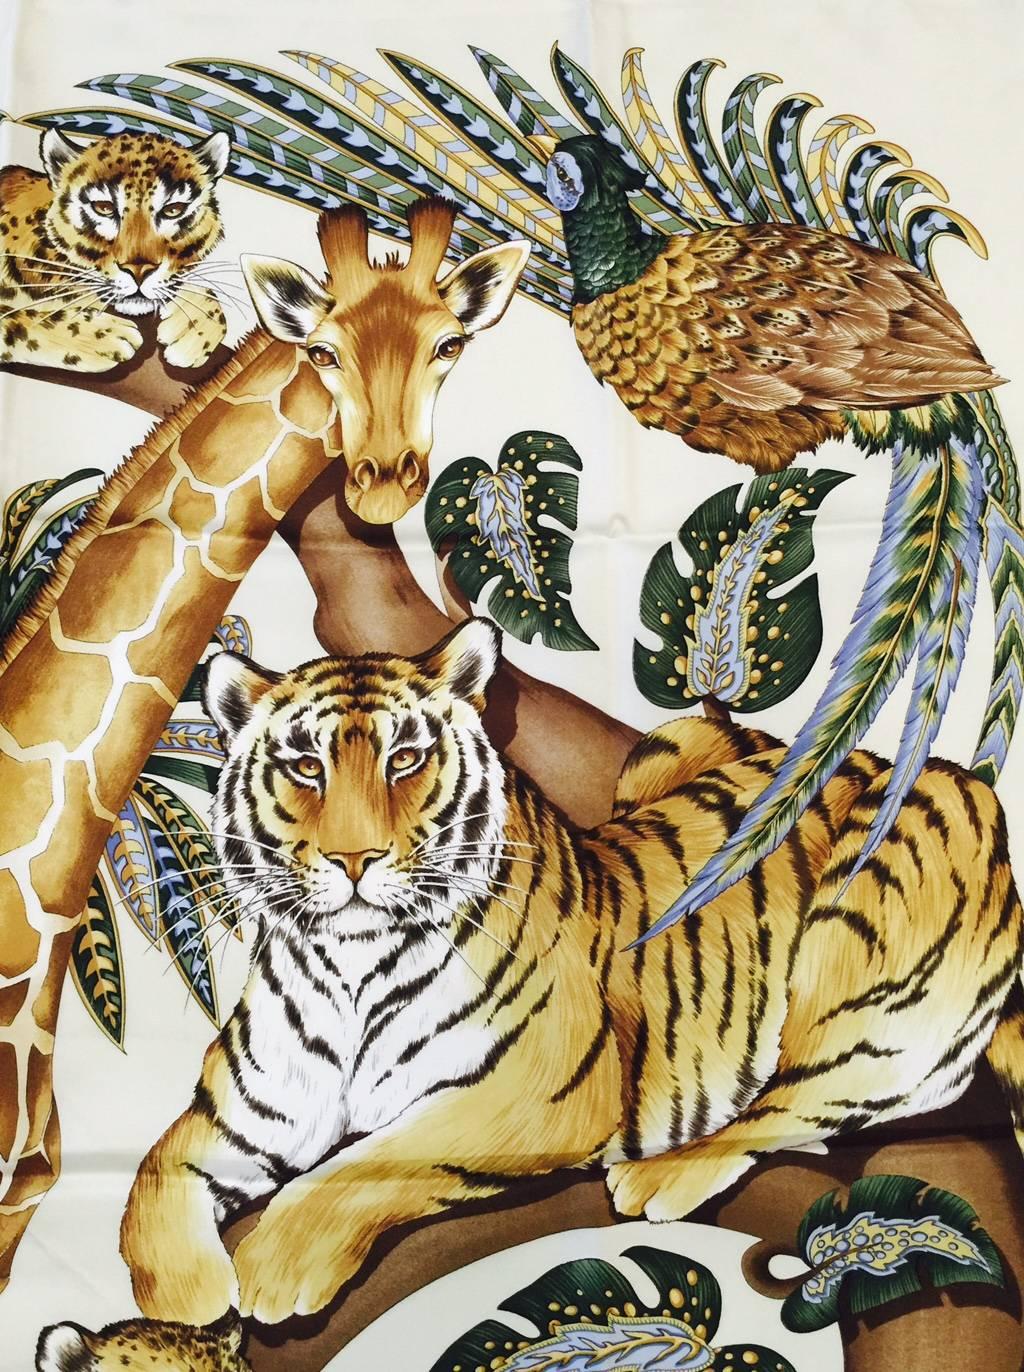 New 100% Silk Twill Scarf is typical Salvatore Ferragamo...Luxurious and Exotic! An ivory border surrounds exotic large cats, including leopards and tigers, a girfaffe and even wild fowl.  The 